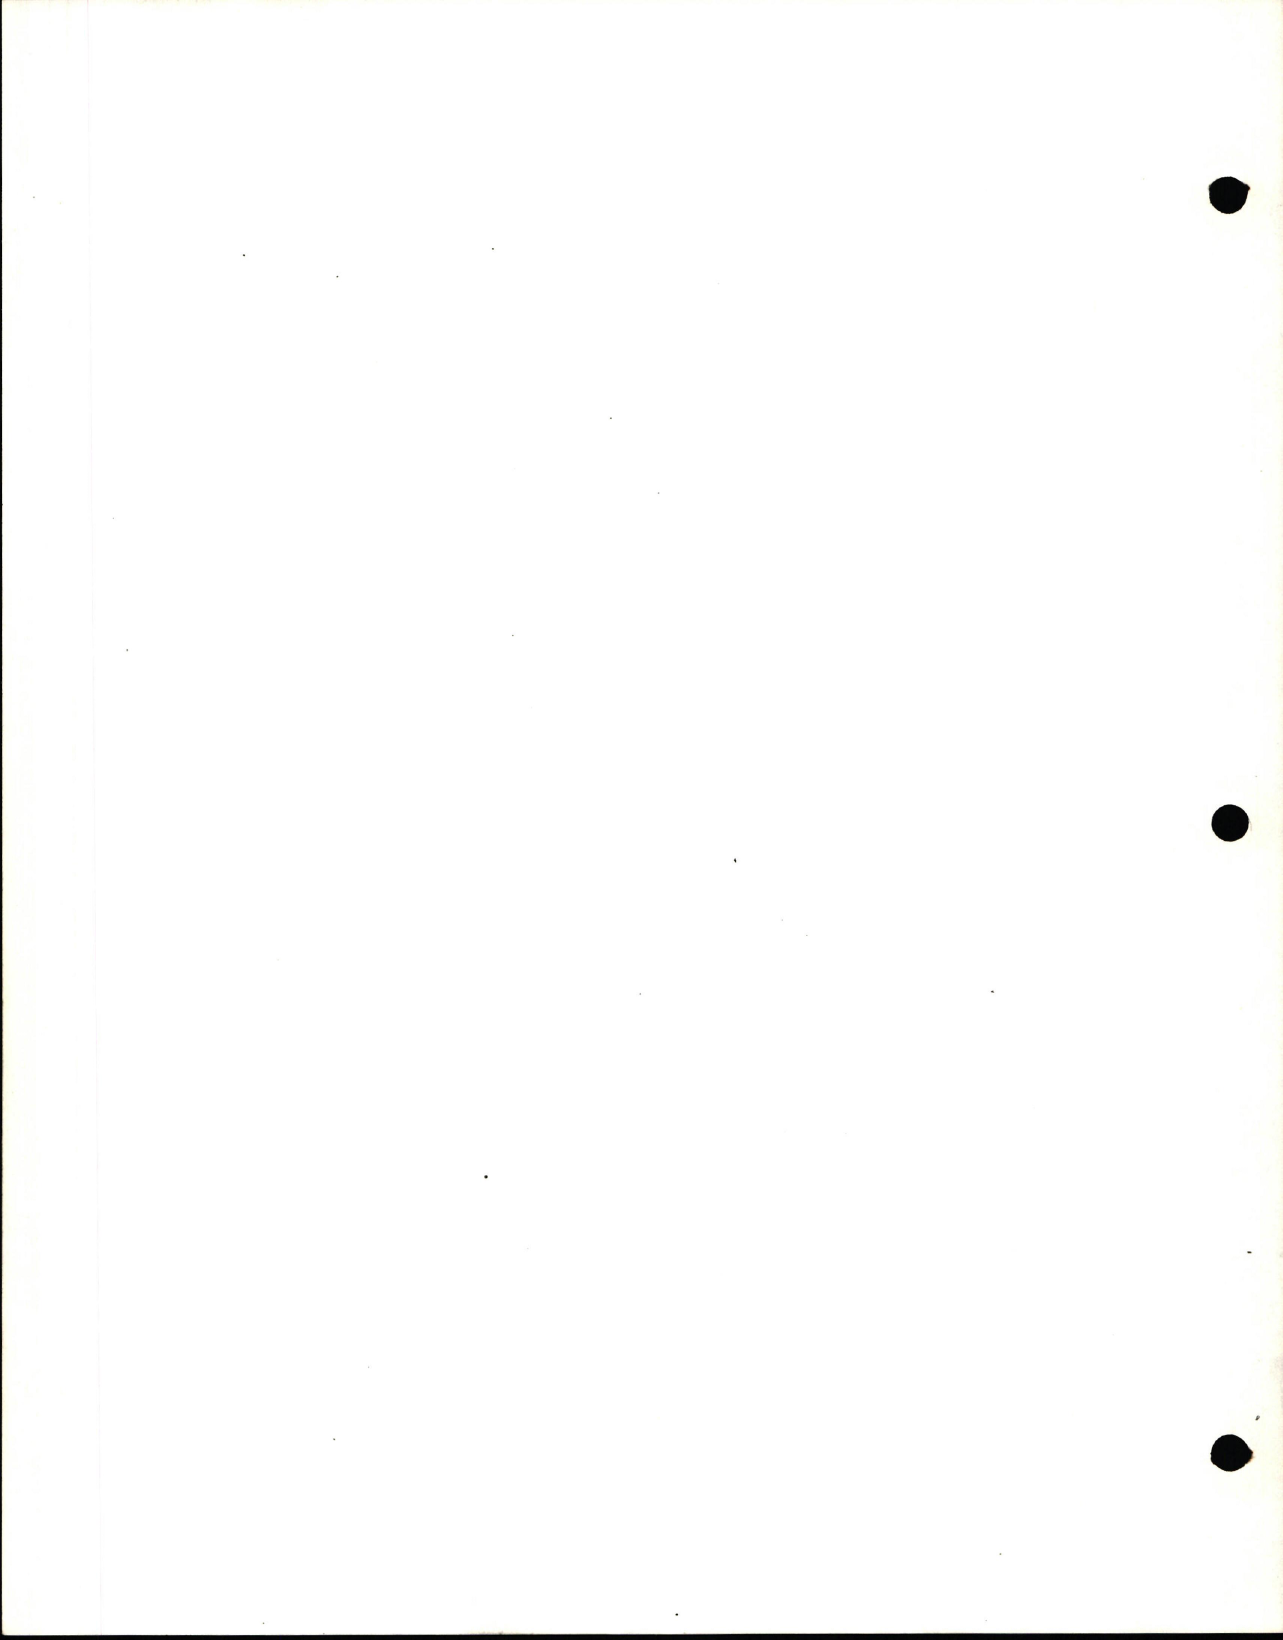 Sample page 8 from AirCorps Library document: Maintenance Manual with Illustrated Parts Breakdown for Variable Displacement Hydraulic Pump